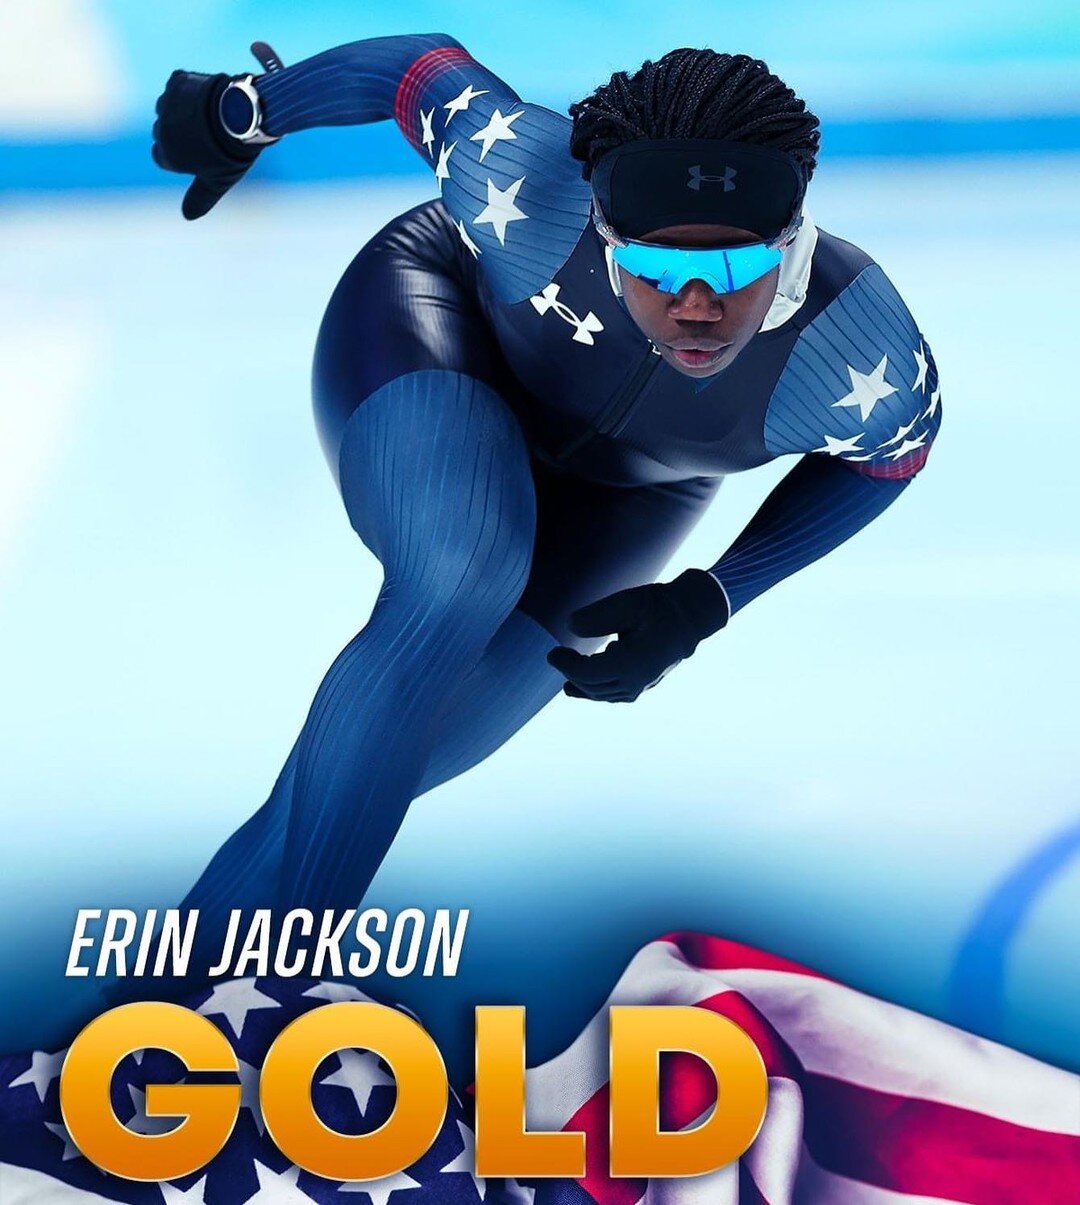 We can&rsquo;t let these #olympicgames end without a shoutout to the incredible @speedyj for her Gold medal win in the women&rsquo;s 500m speed skate in Beijing! Erin is the first American woman to win an individual medal since 2002 and the first Afr